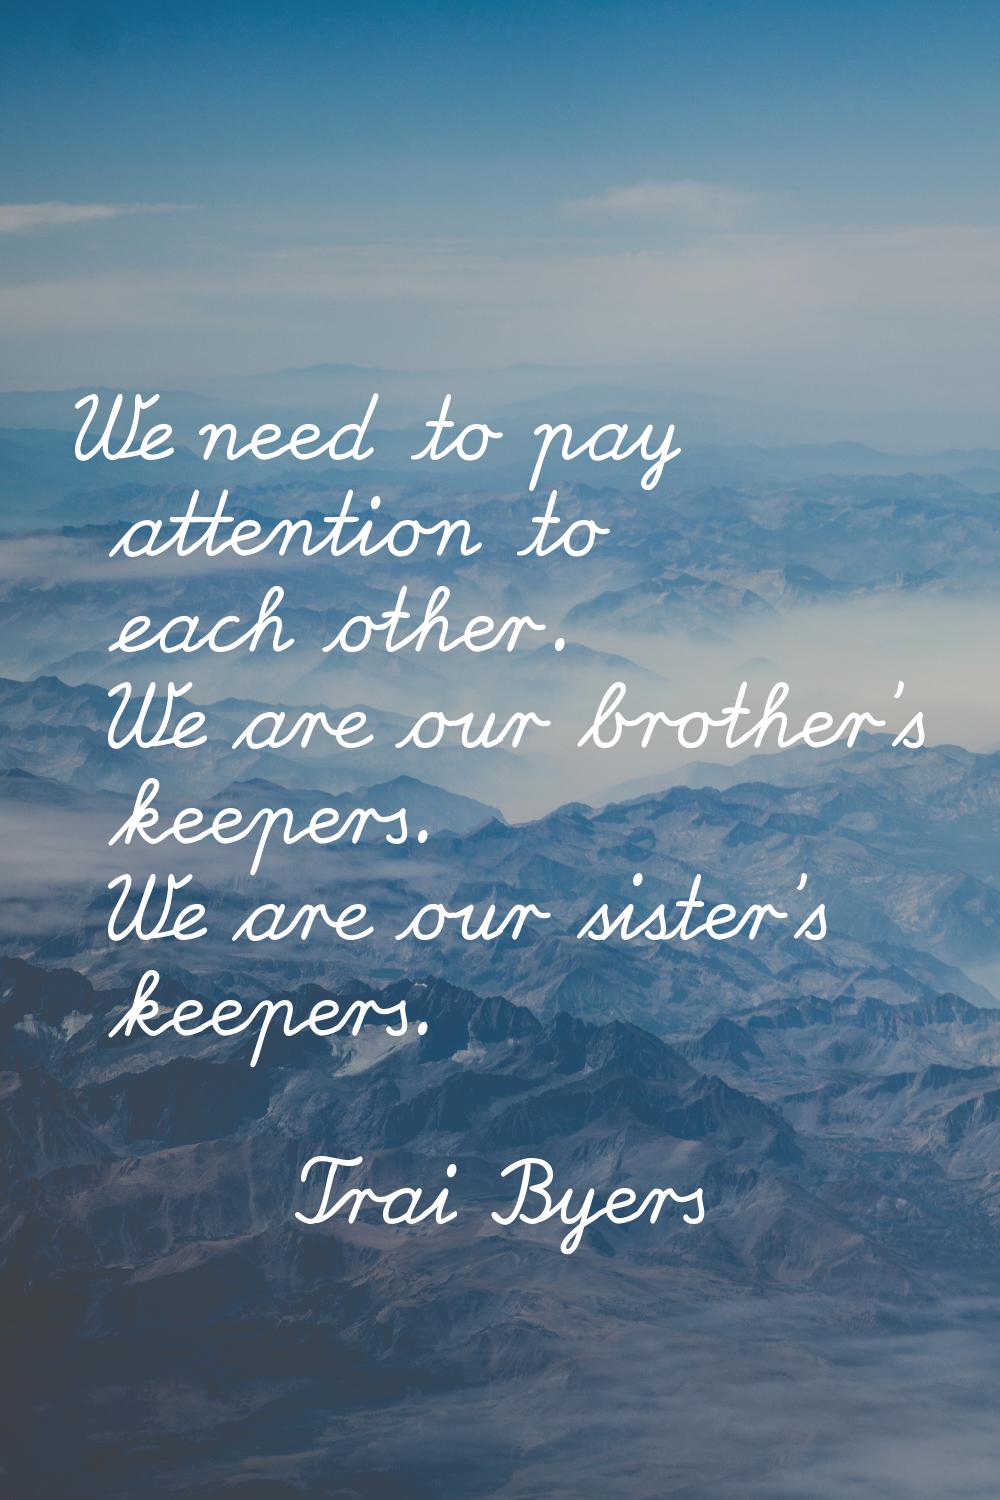 We need to pay attention to each other. We are our brother's keepers. We are our sister's keepers.